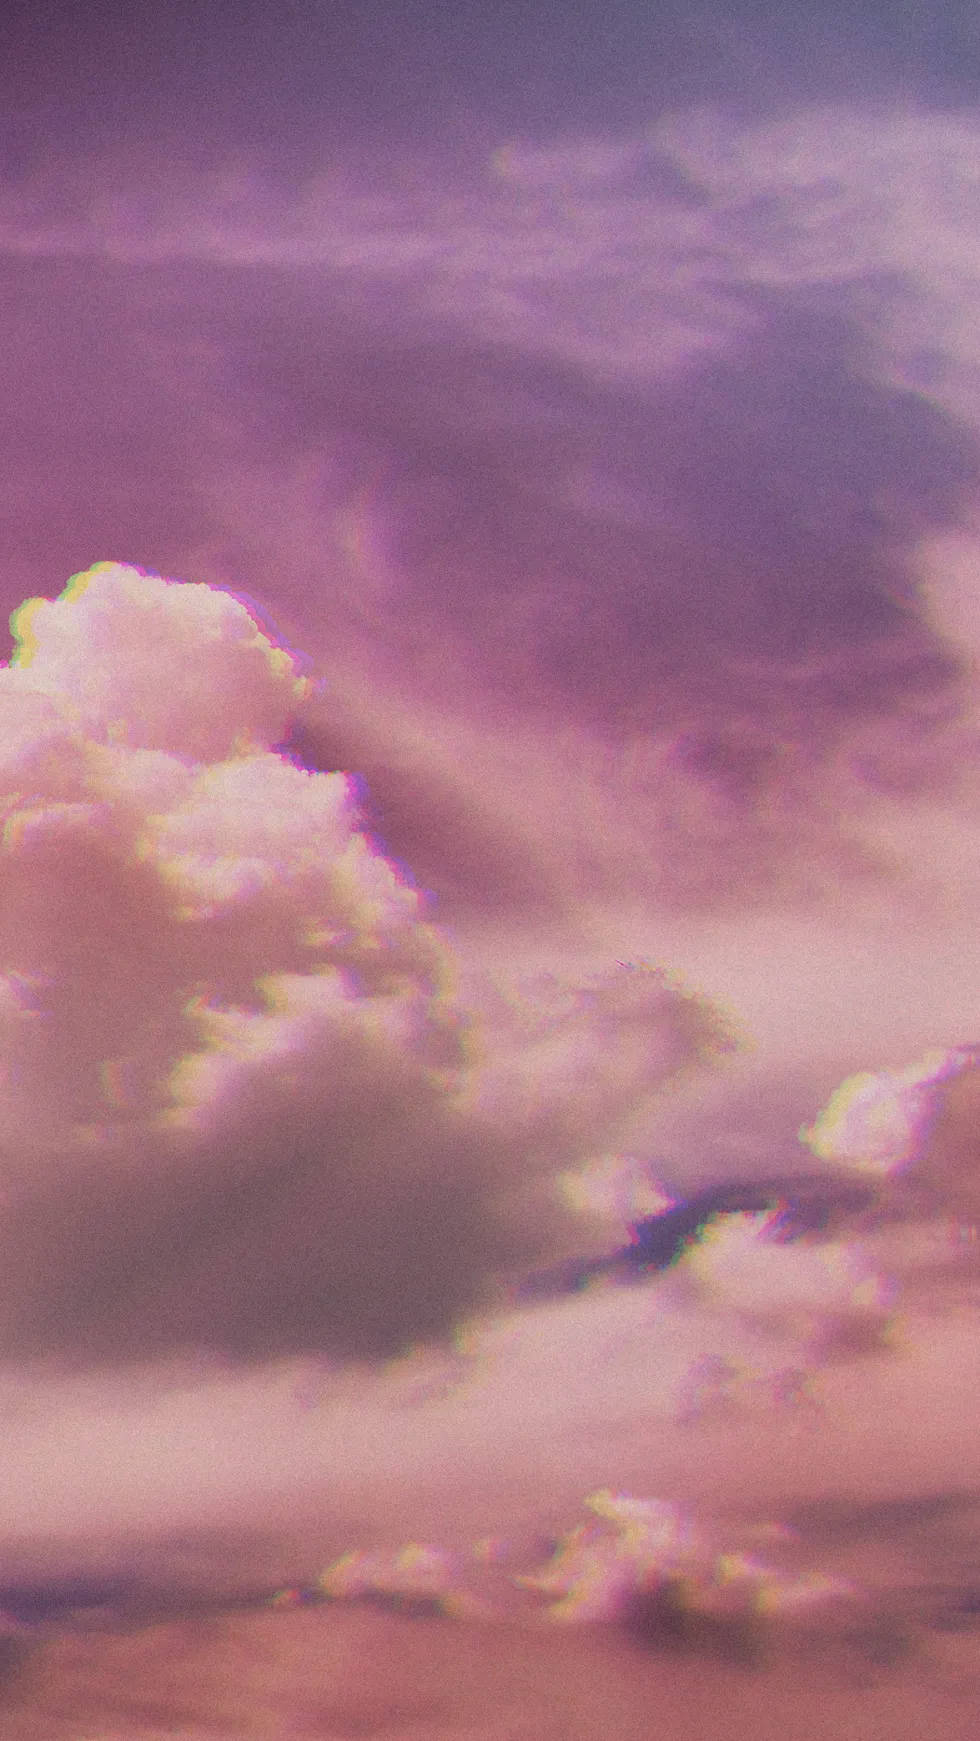 Vintage Aesthetic Clouds Pink Sky Background